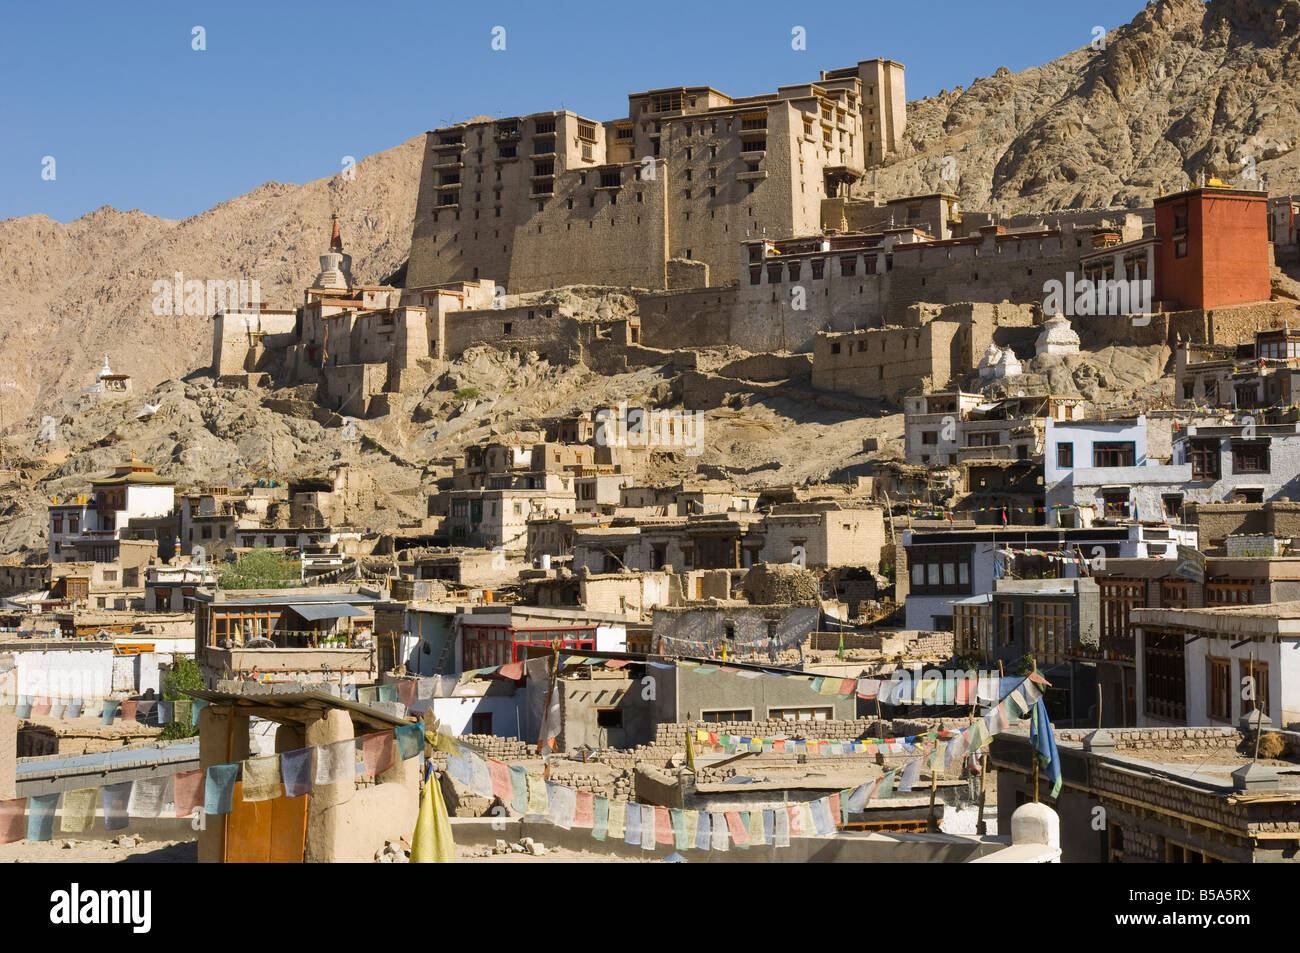 View of the old city with Leh palace in background, Leh, Ladakh, India Stock Photo